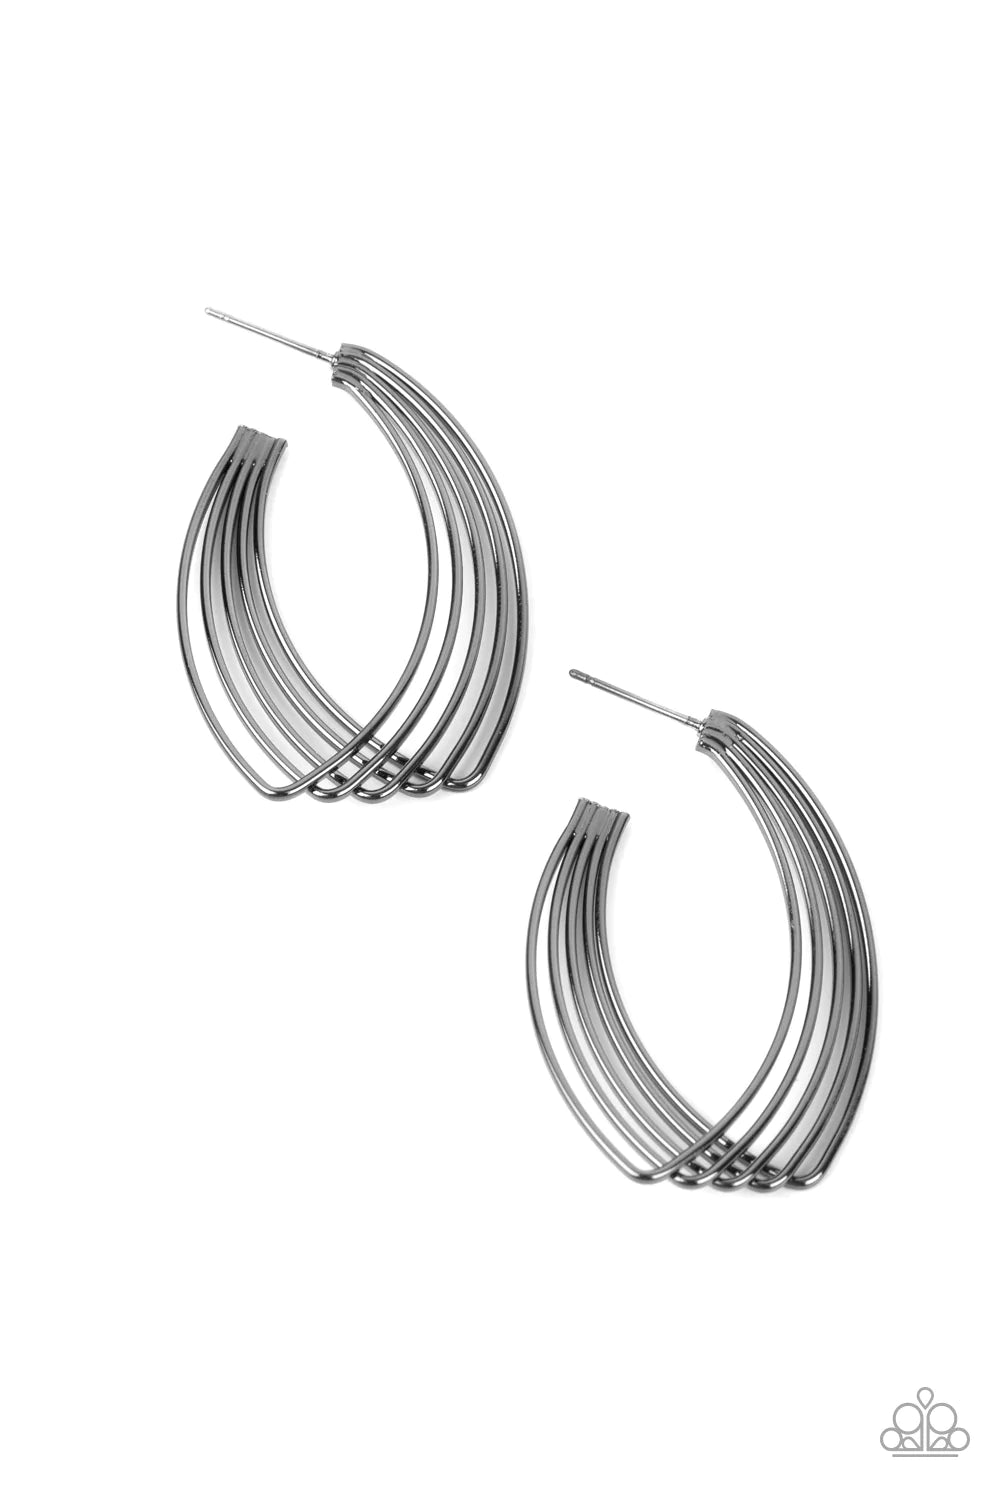 Paparazzi Accessories Industrial Illusion - Black A shiny collection of dainty gunmetal wires twist and layer into a hook shaped frame, creating an edgy illusion. Earring attaches to a standard post fitting. Hoop measures approximately 1" in diameter. Sol